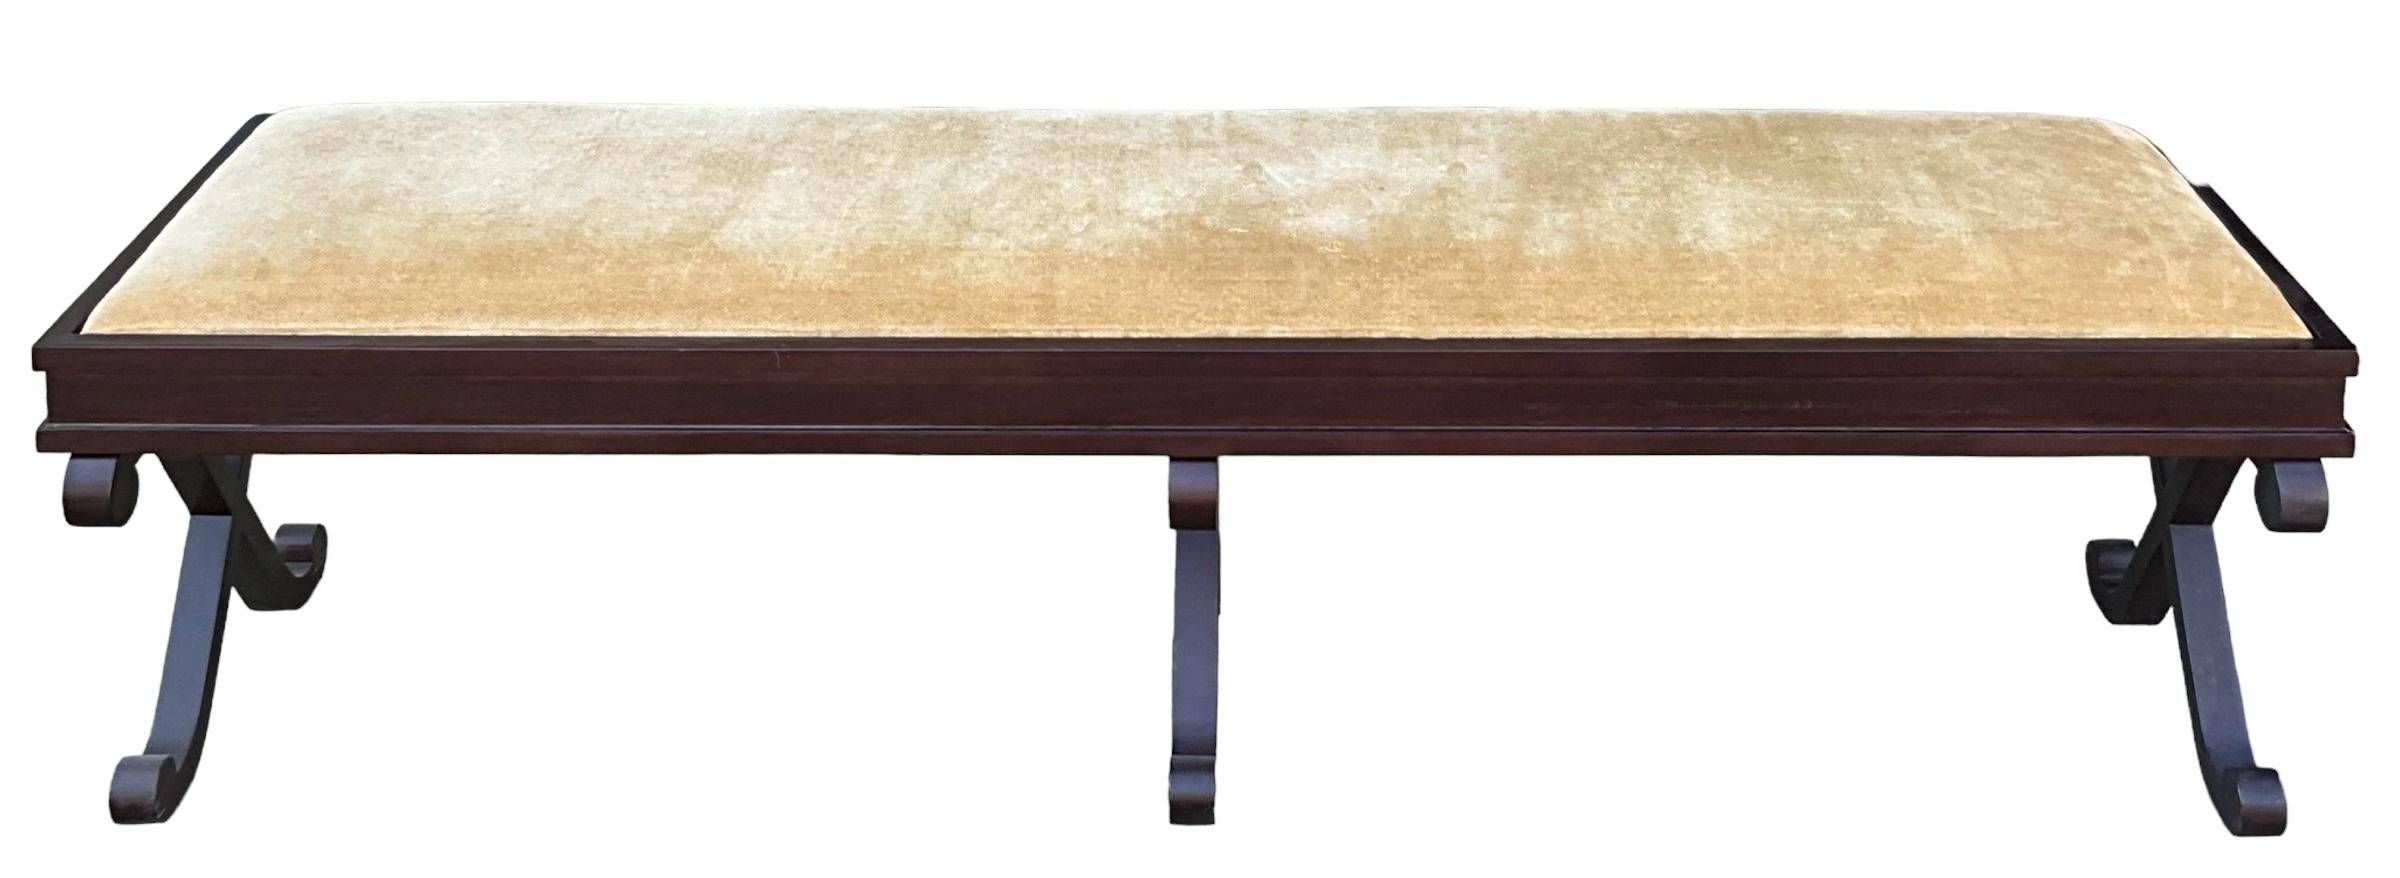 Neoclassical Late 20th-C. Neo-Classical Style Long X-Based Bench In Gold Velvet  For Sale